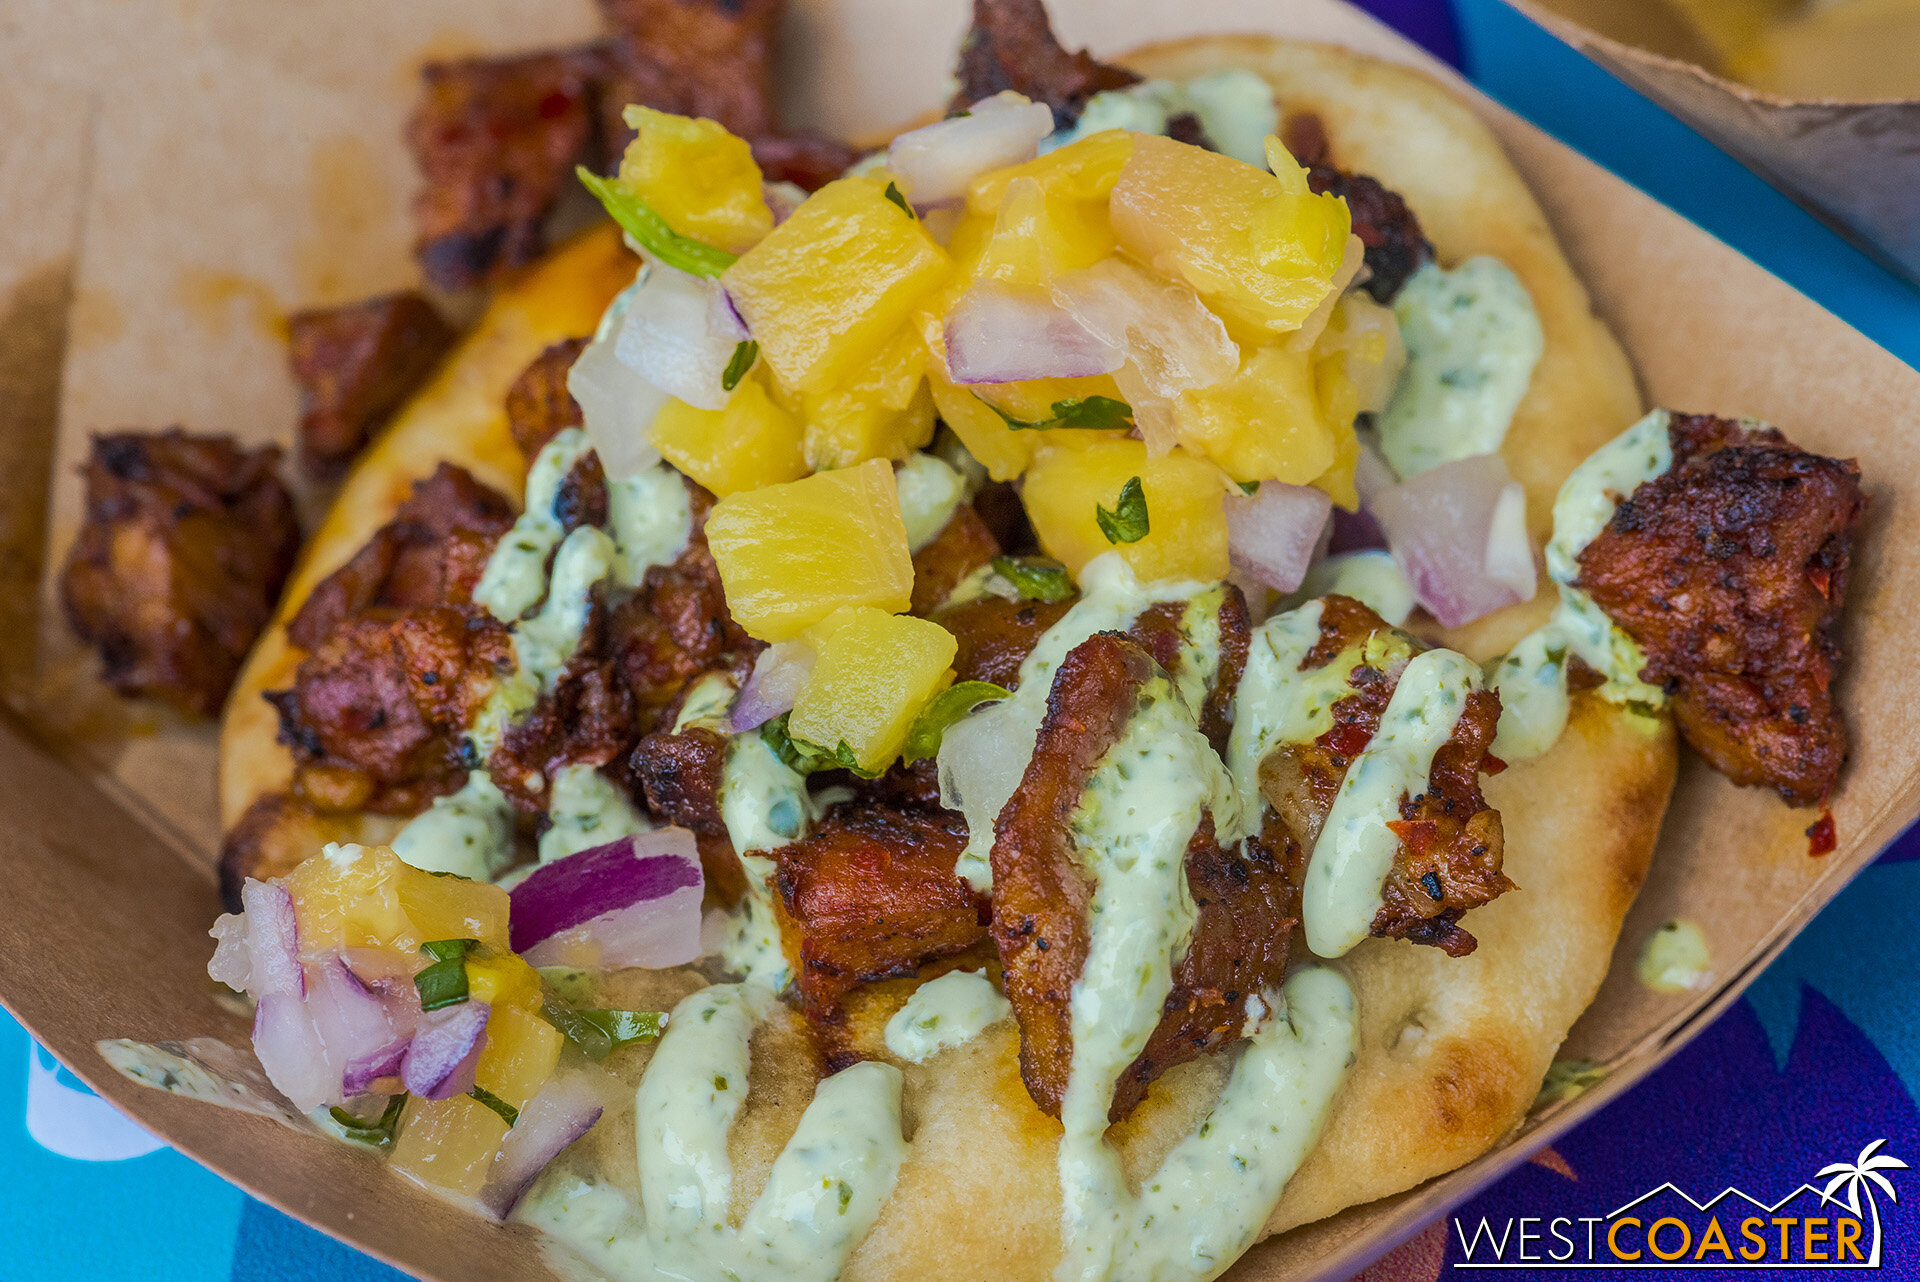  Merry Mashups Marketplace: Pork al Pastor Naan Taco – With Pineapple Pico de Gallo and Cilantro-Lime Crema   There is a lot going on here, but this is a very flavorful and tasty item whose components really work well together.  Although the naan was